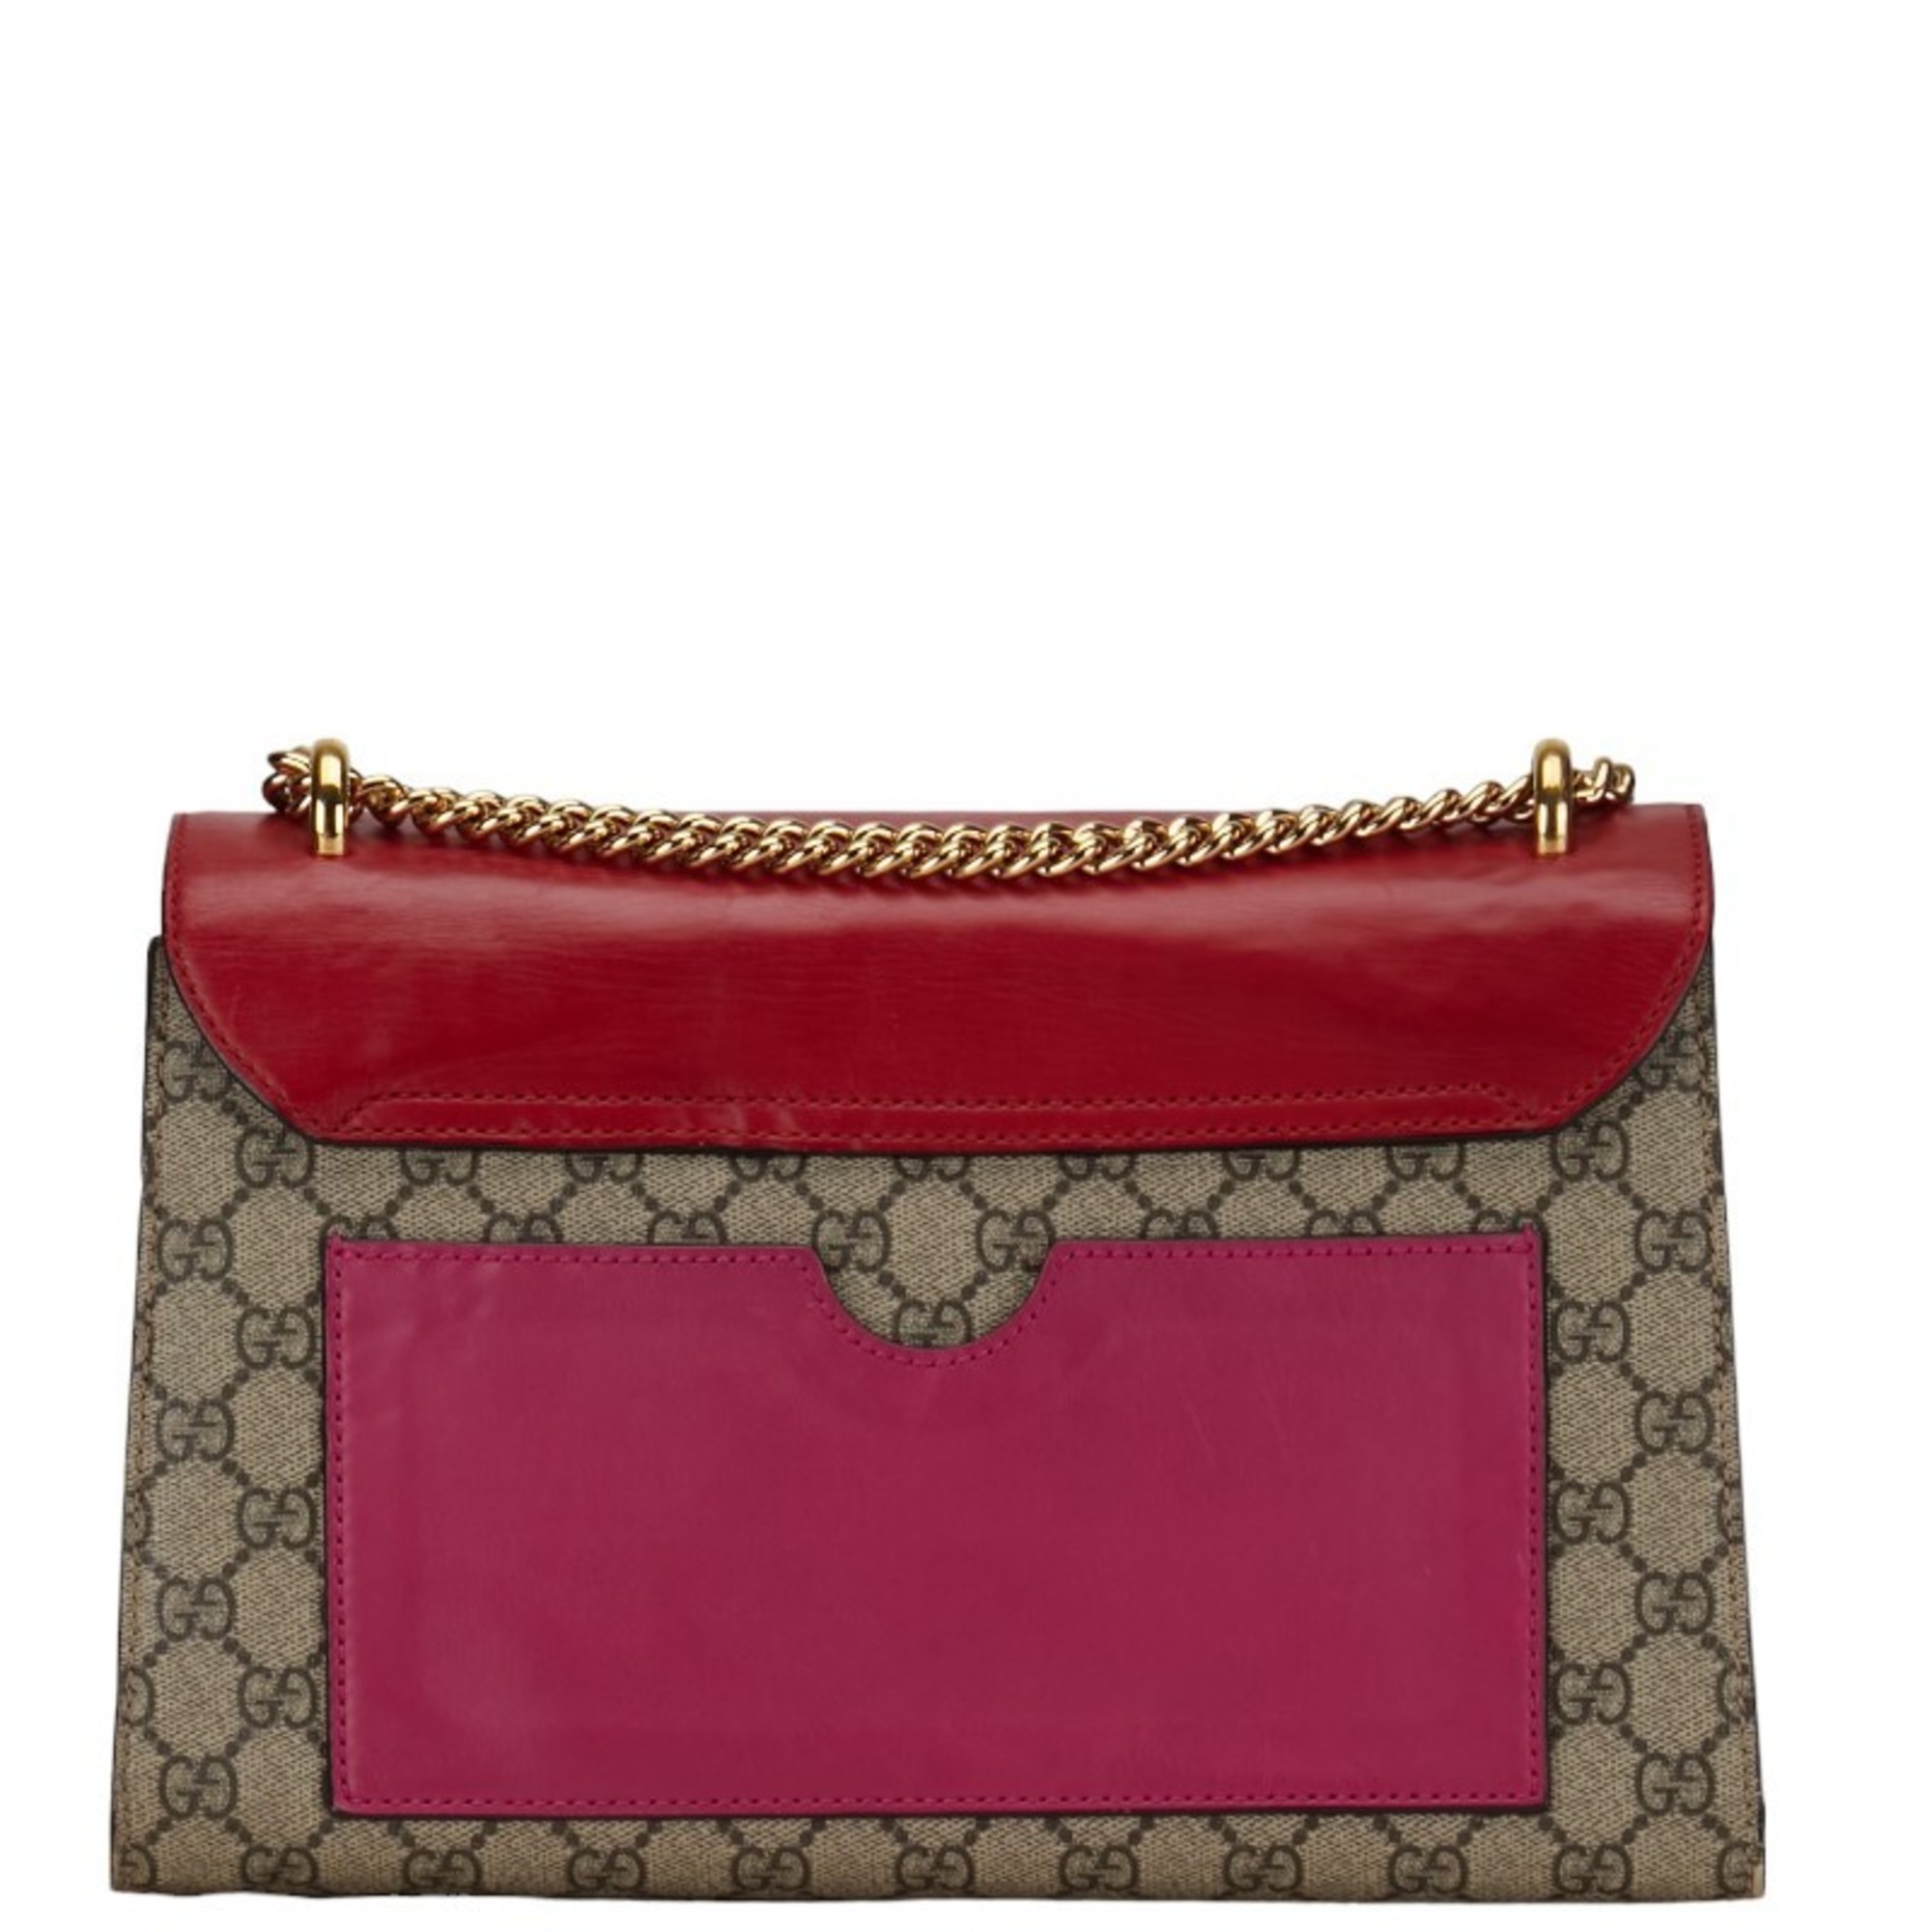 Gucci GG Supreme Chain Shoulder Bag 409486 Beige Red Pink PVC Leather Women's GUCCI